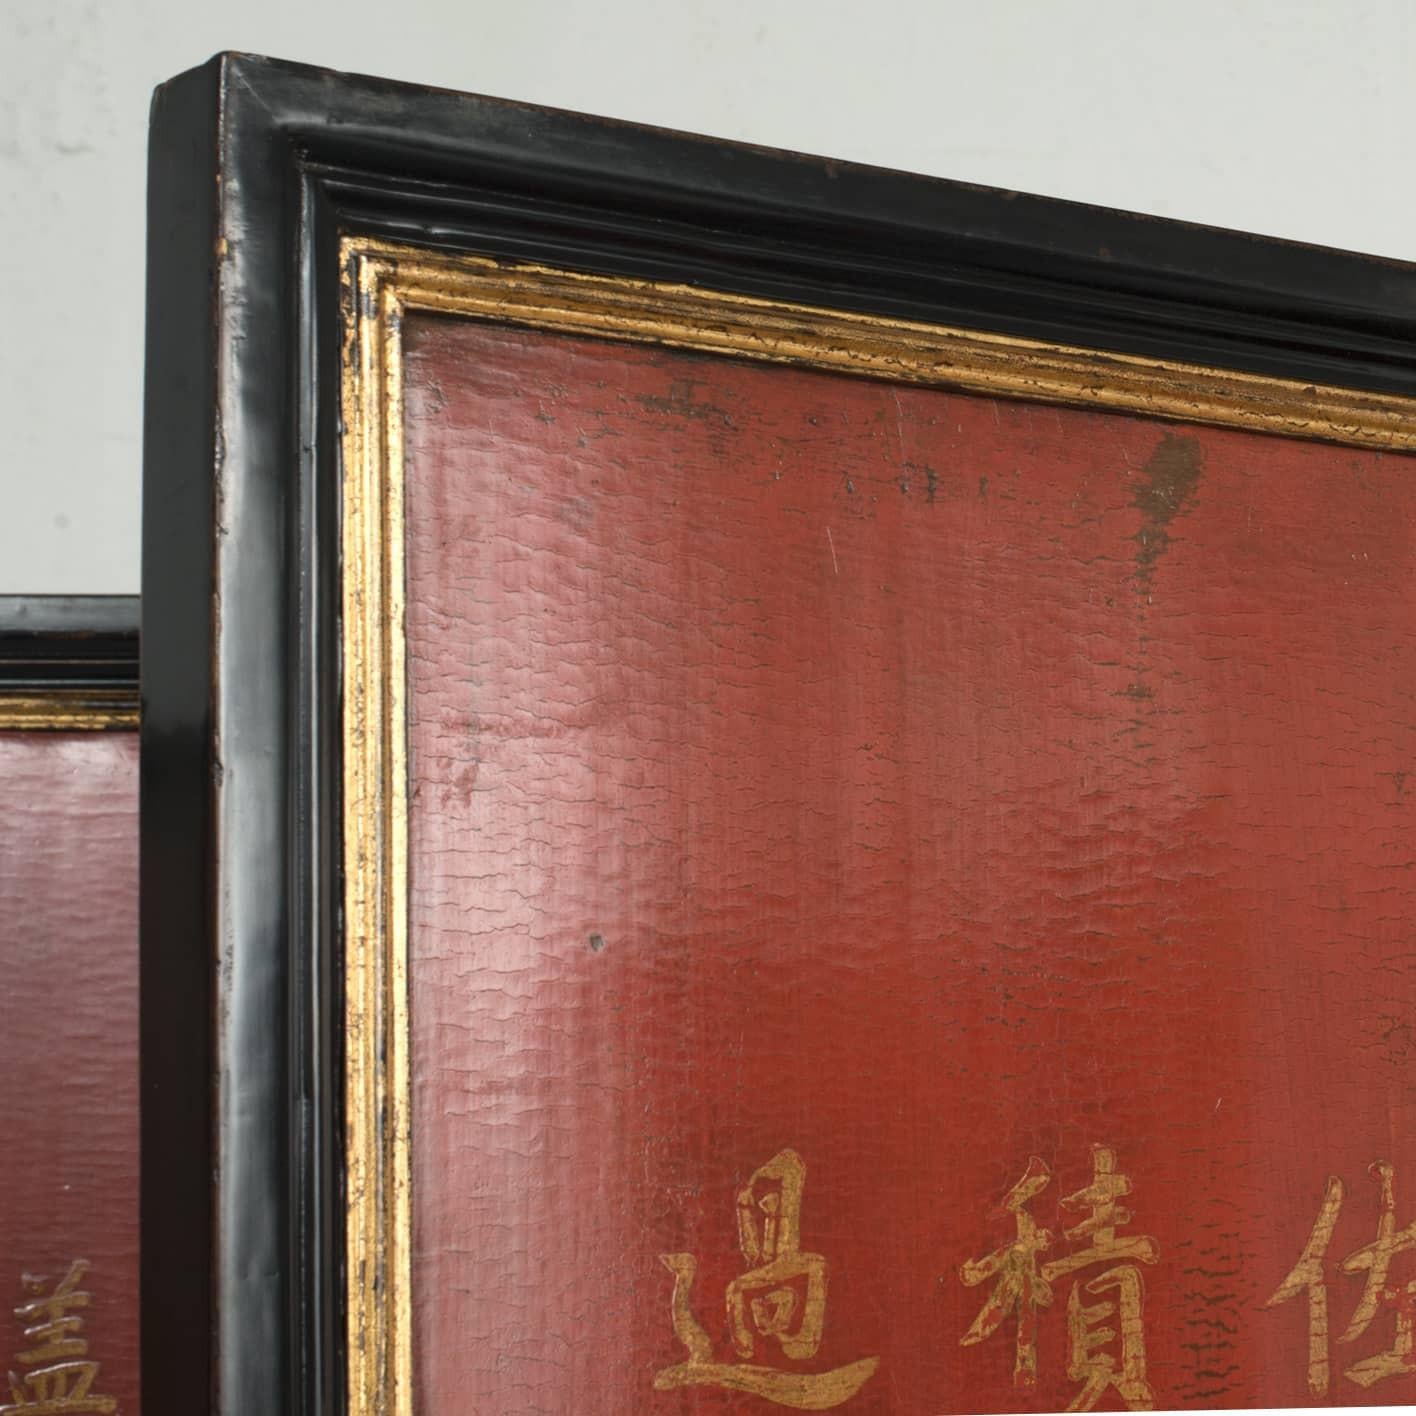 10 Lacquer Calligraphy Panels, Later Mounted as a Screen, Late 18th Century In Good Condition For Sale In Kastrup, DK